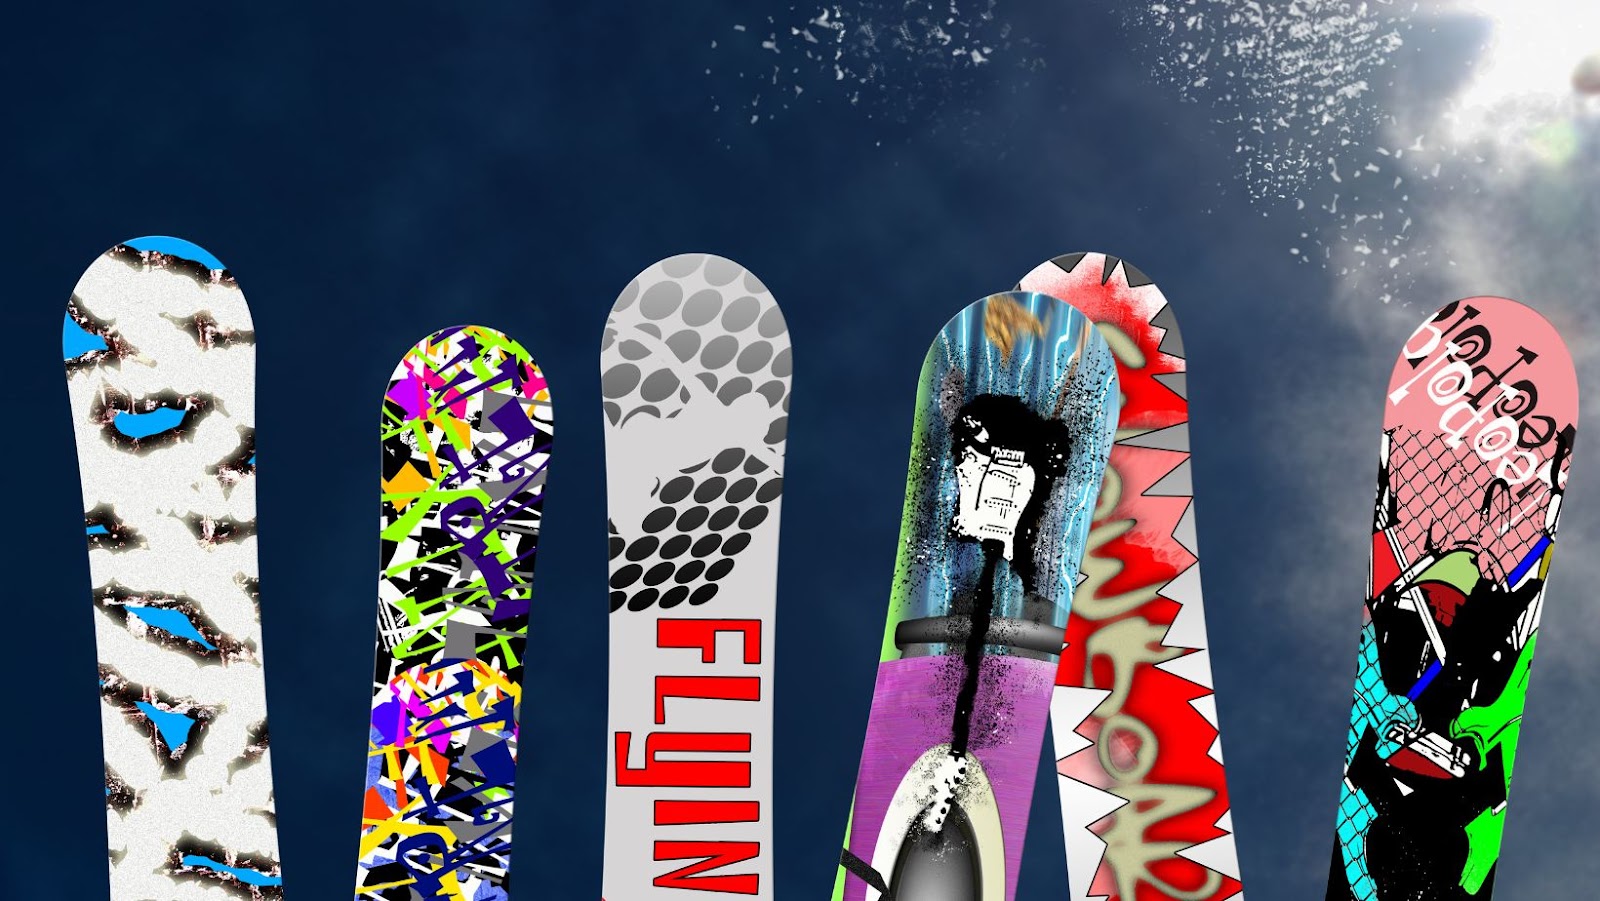 The Coolest Ski and Snowboard Racks for Your Wall